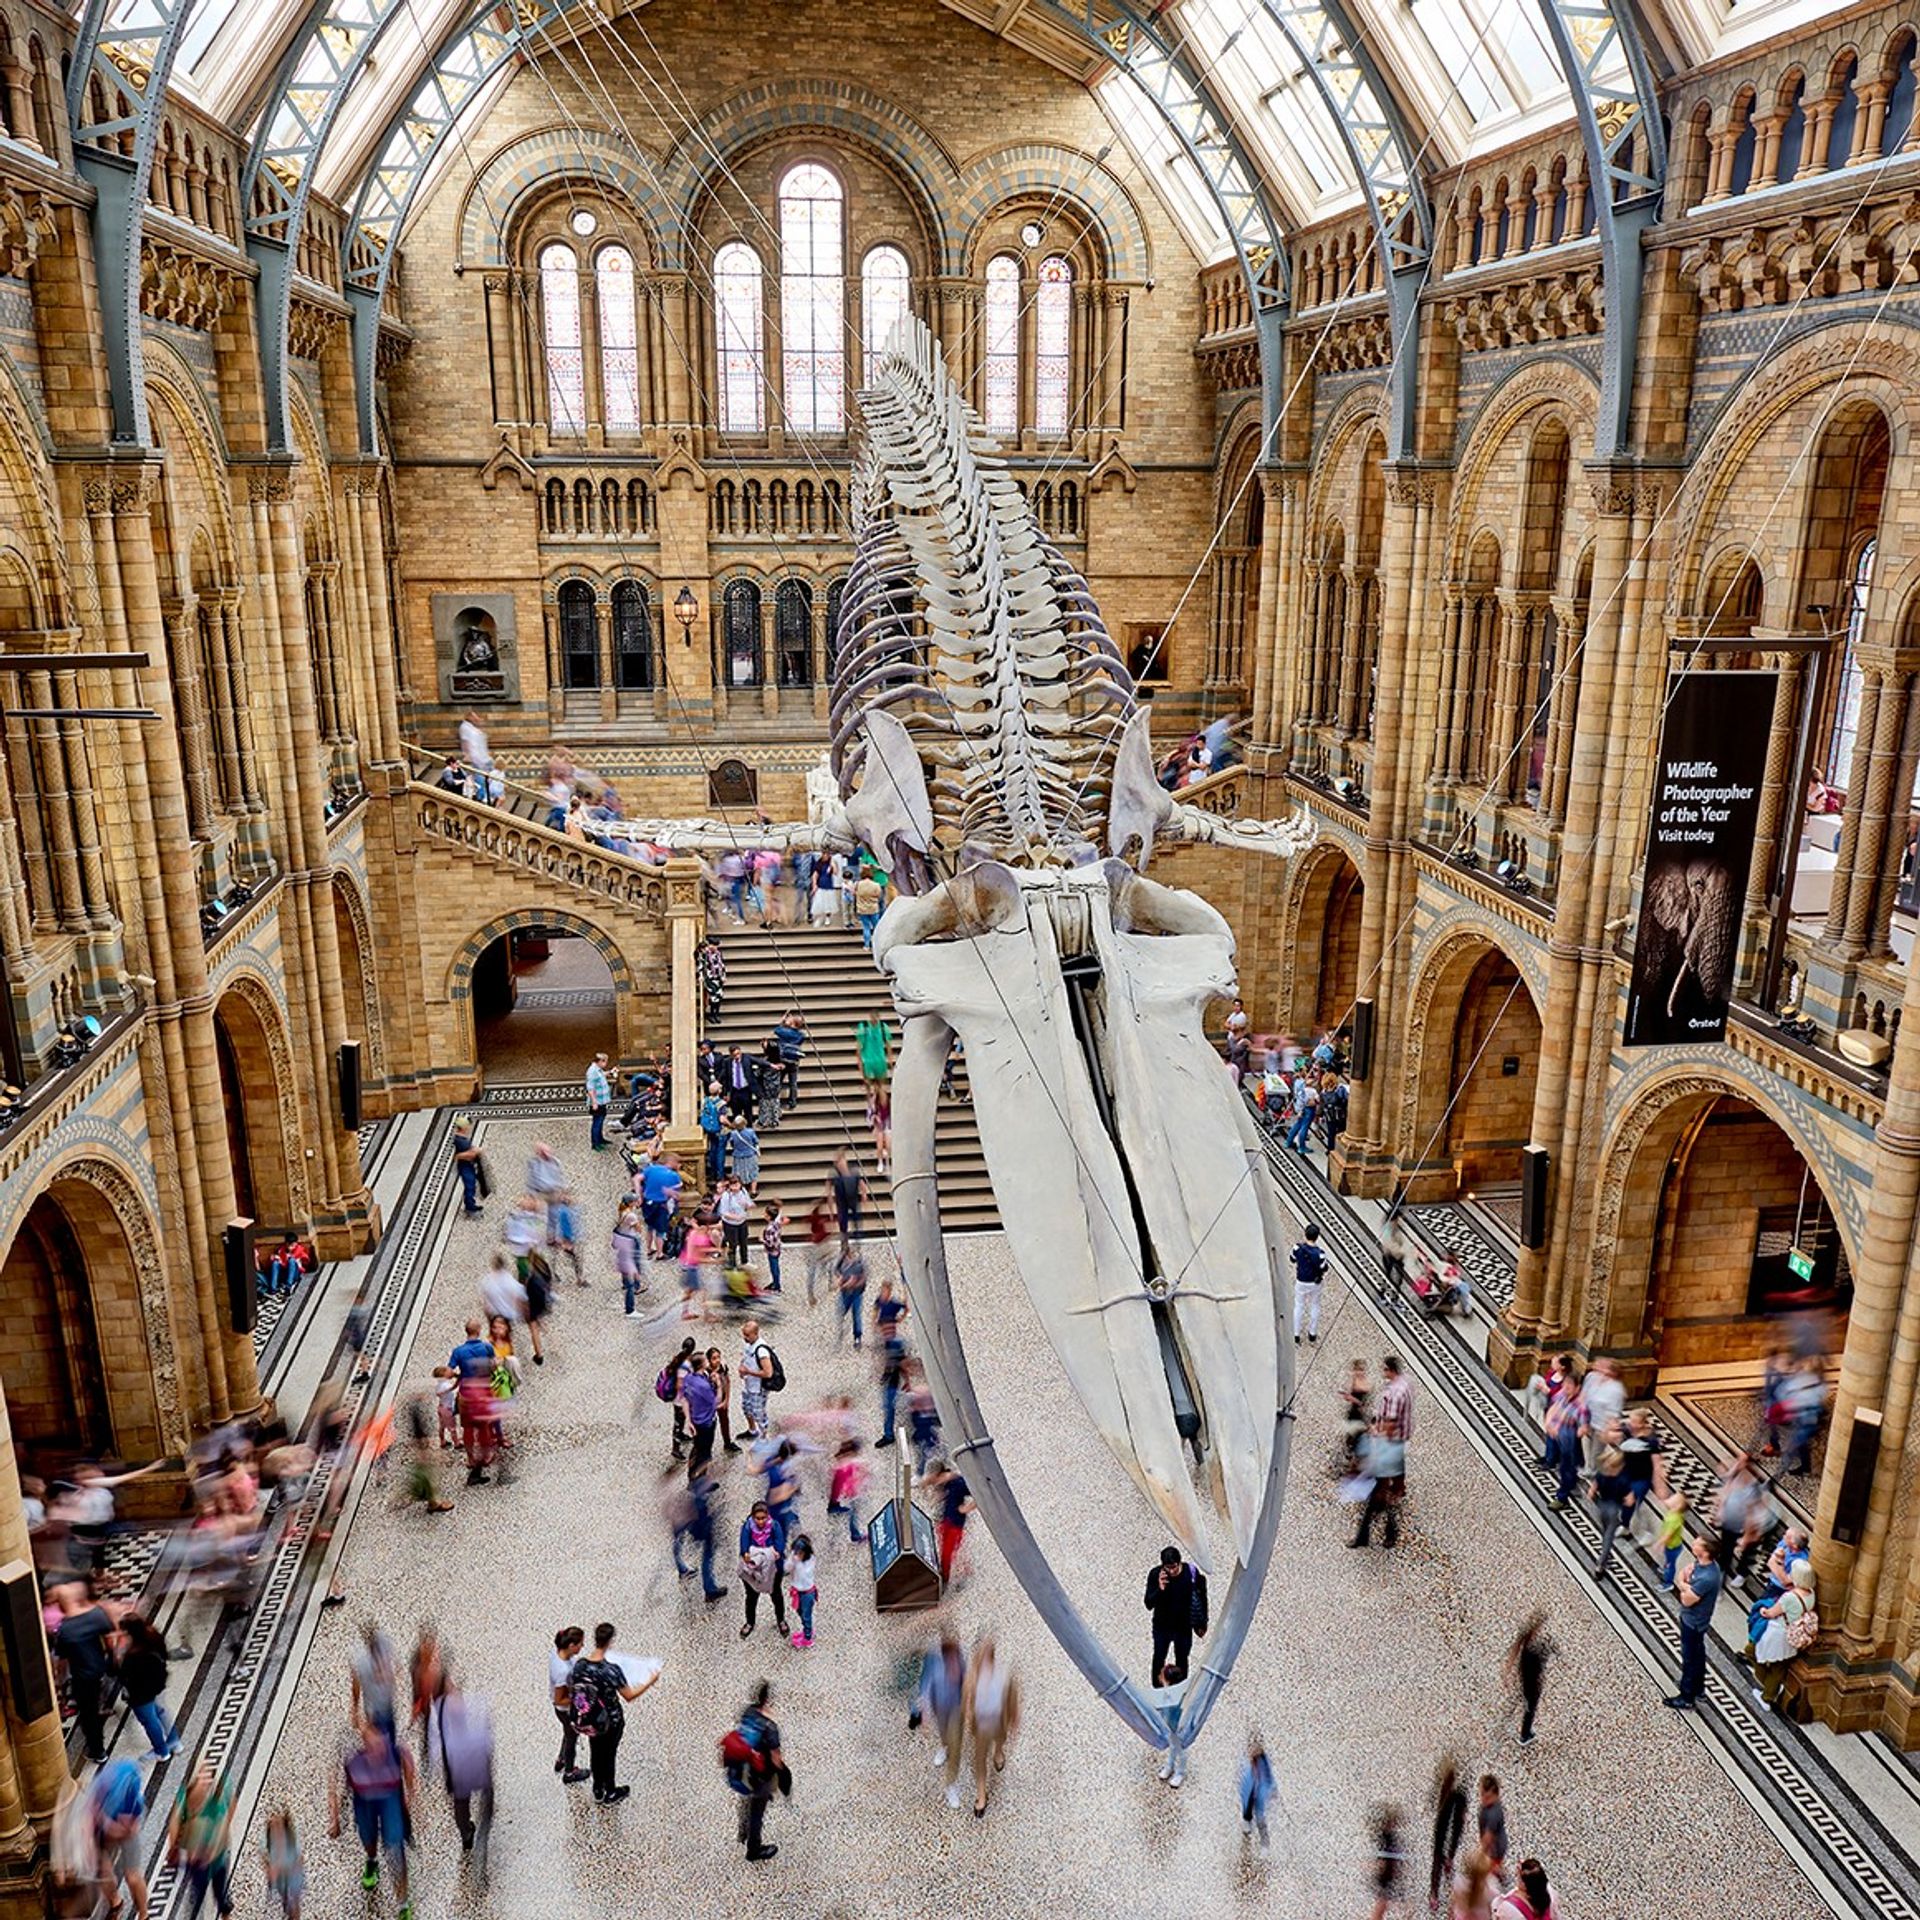 The Natural History Museum in London has closed its doors untill 27 December due to rising Covid-19 case numbers linked the Omicron variant. Courtesy of Trustees of the Natural History Museum